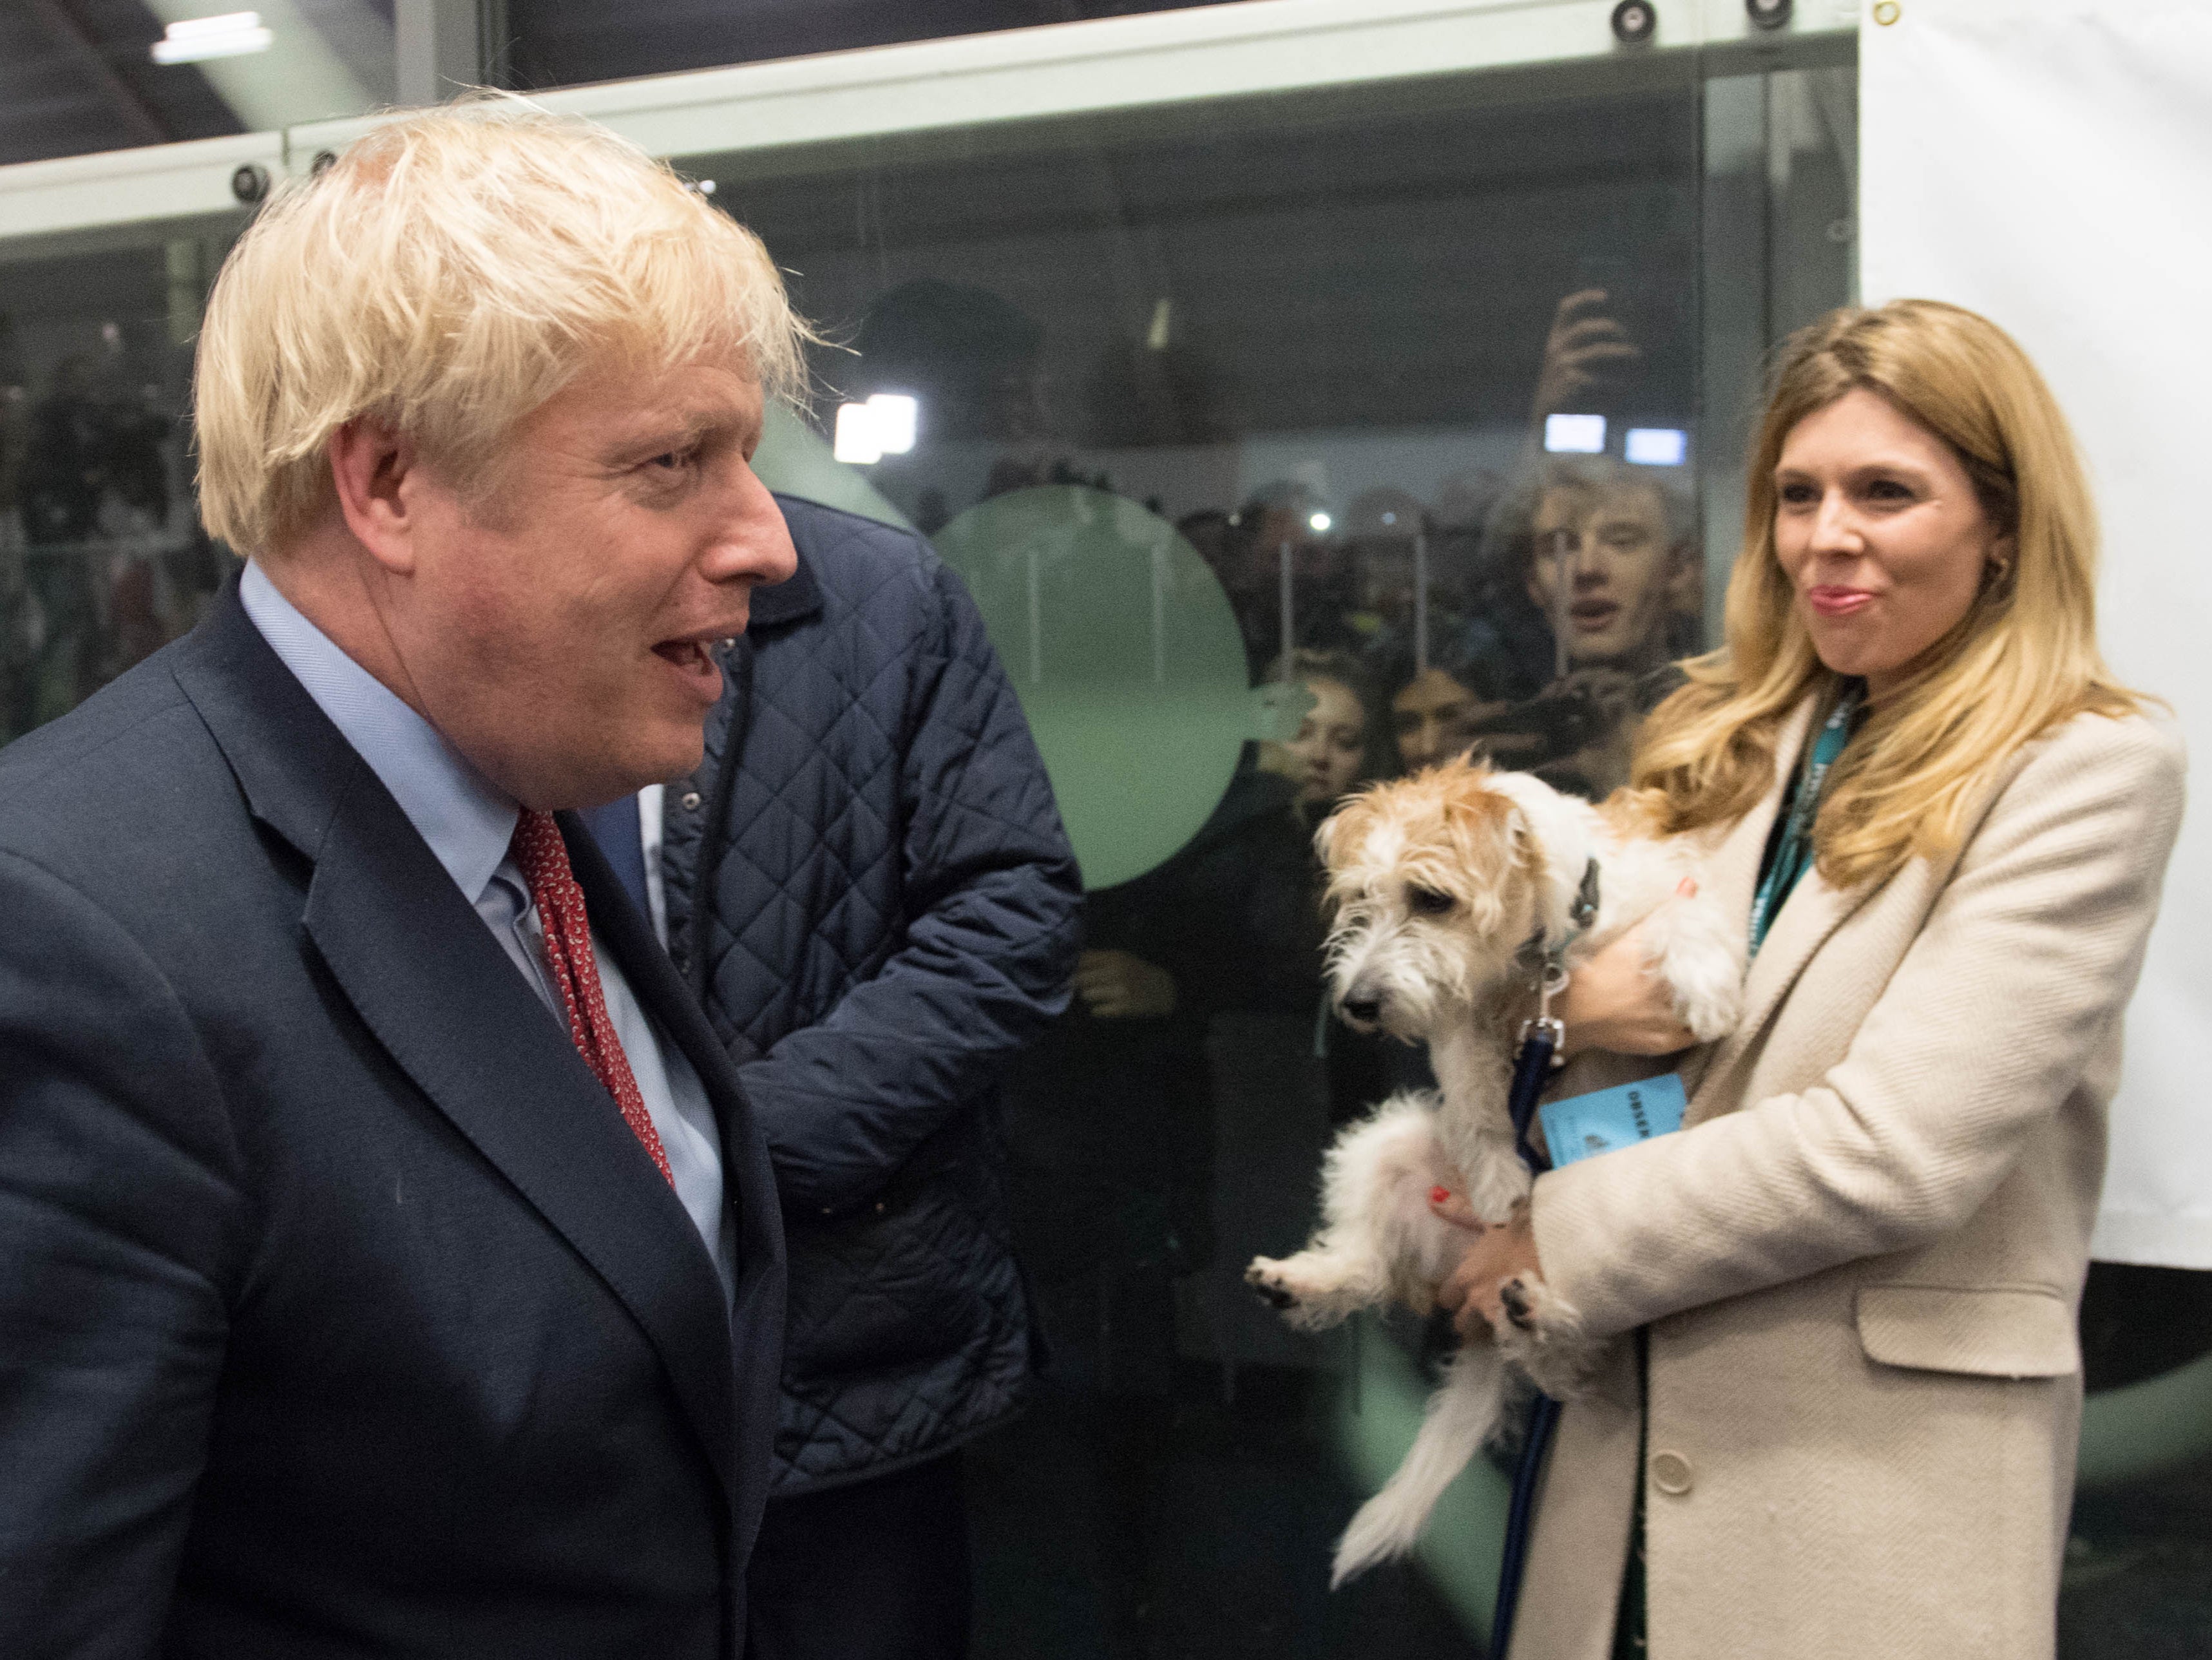 Boris Johnson with partner Carrie Symonds and dog Dilyn at the count in his Uxbridge constituency during the 2019 general election